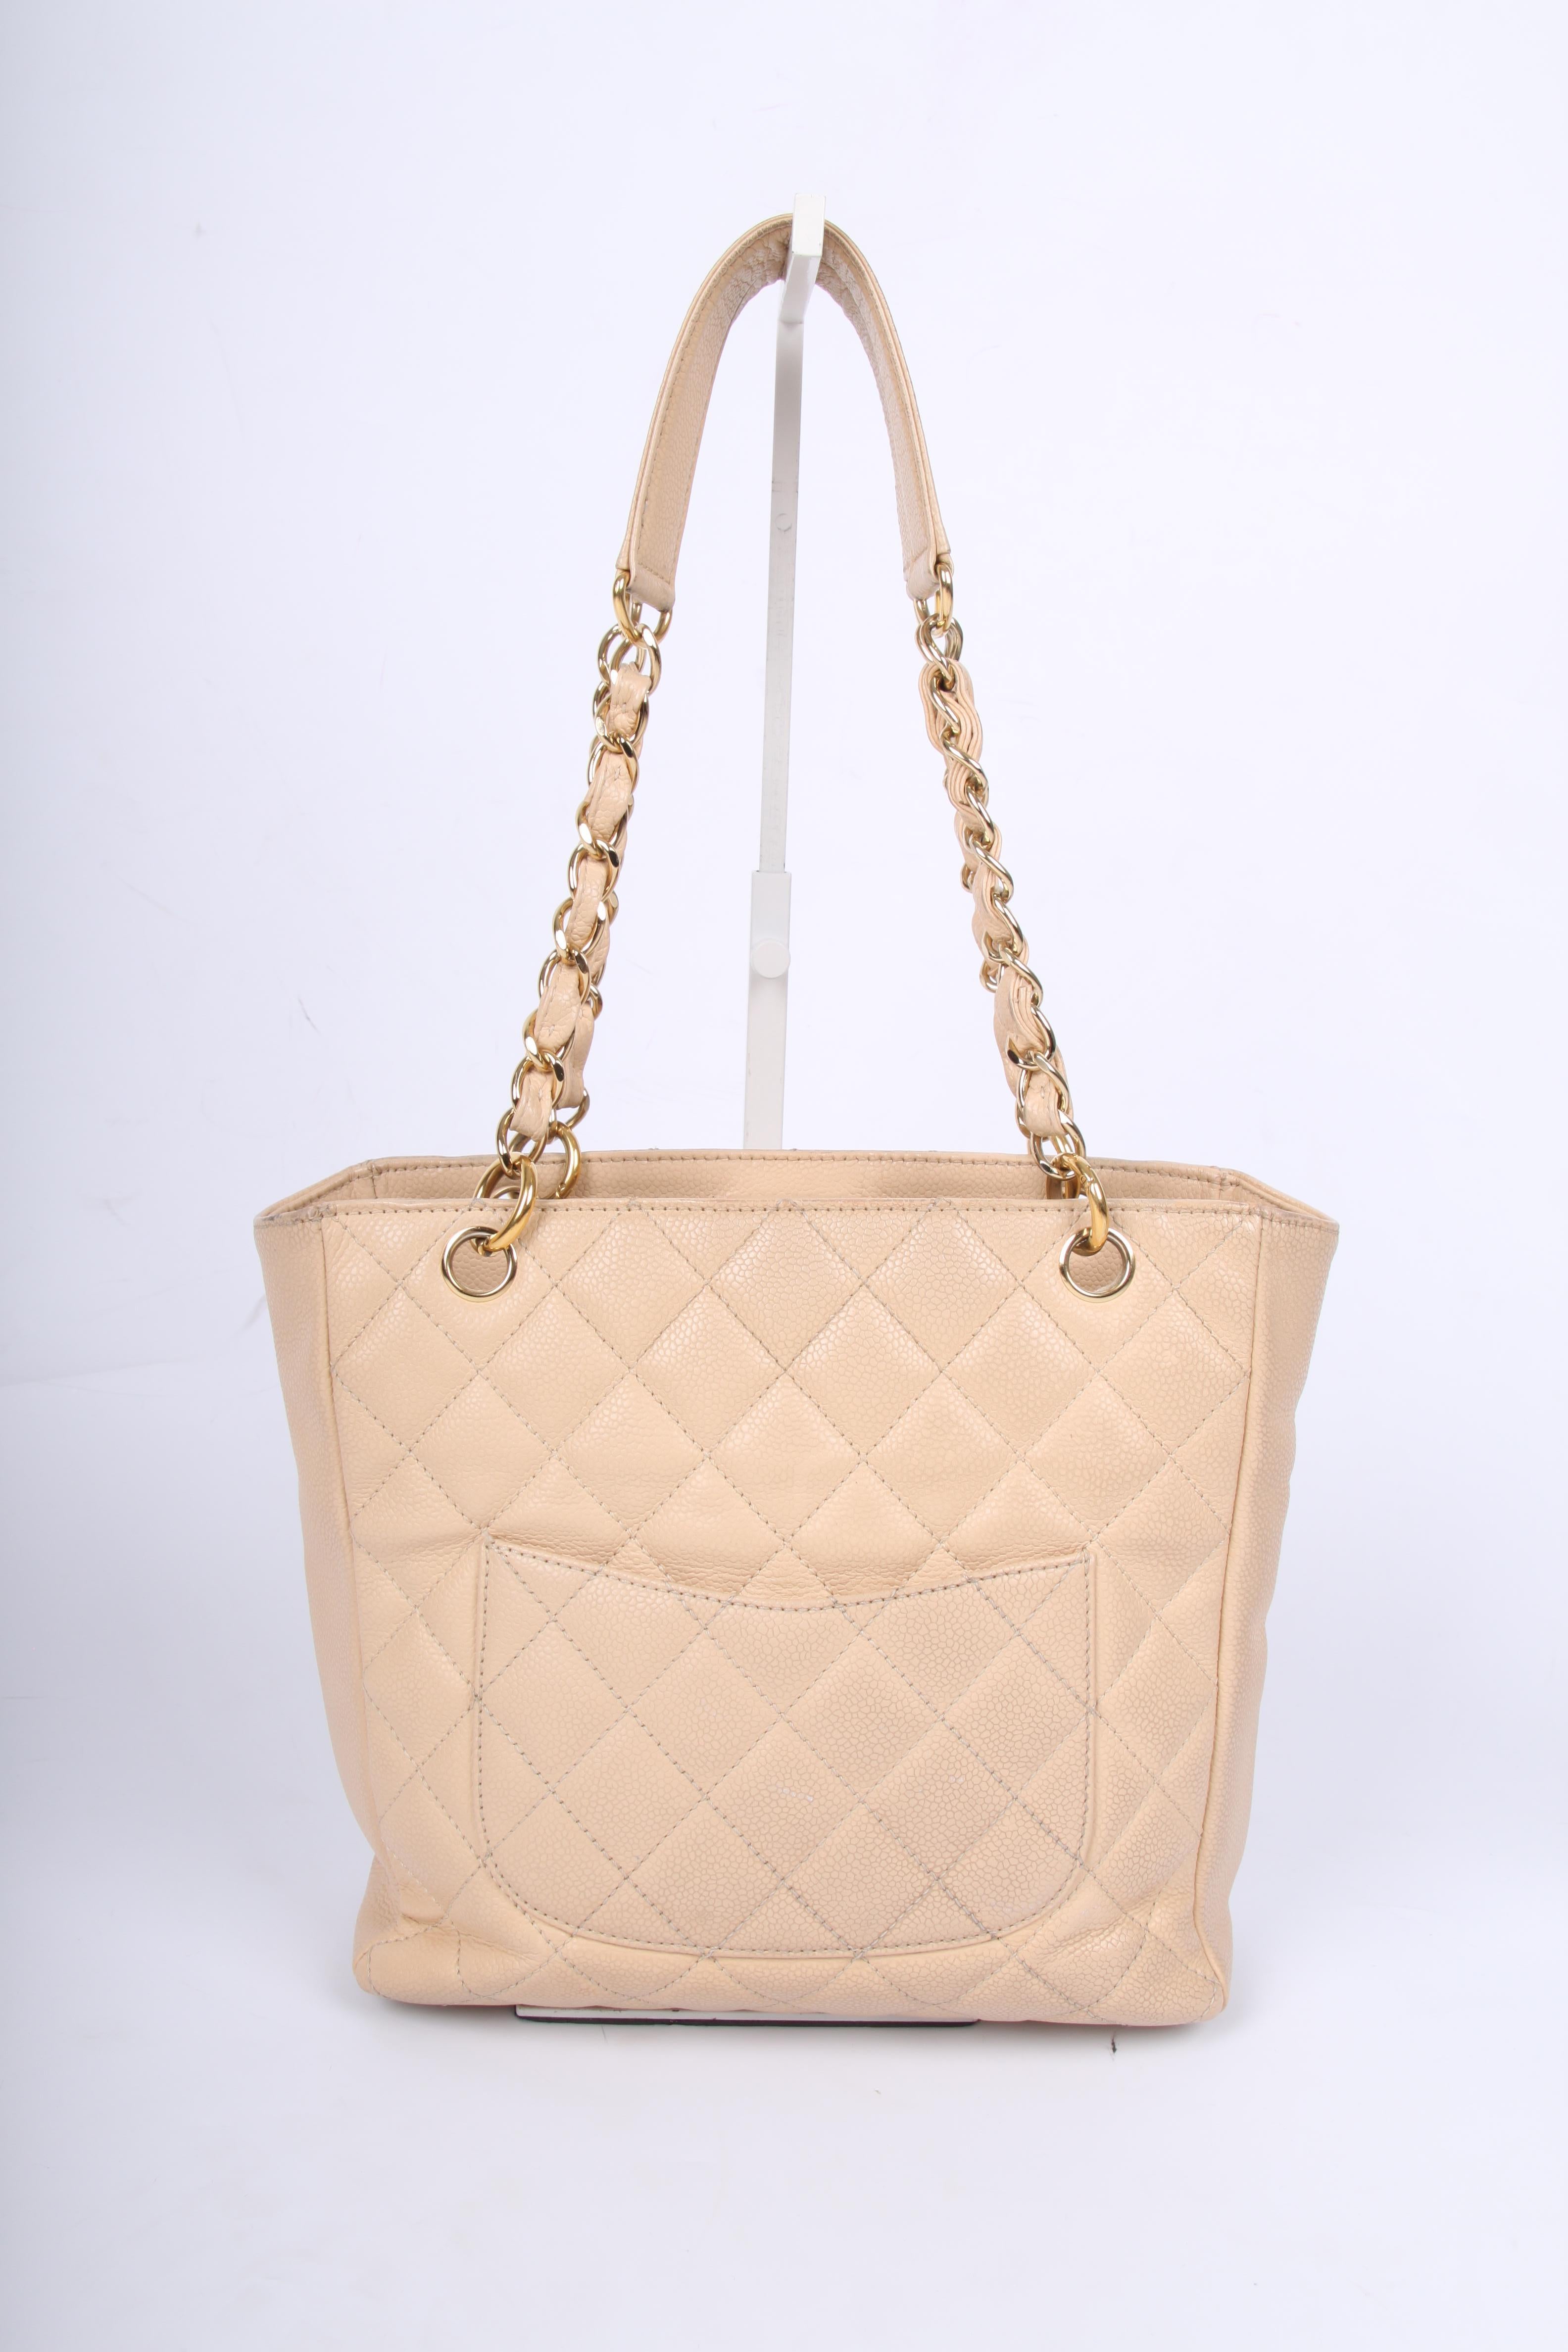 We don't see this classic bag by Chanel very often, but it is a true beauty! Timeless, this piece was once designed by Coco and still in fashion.

A beige mini shopper with golden hardware in caviar leather. Large interlocking CC at the front of